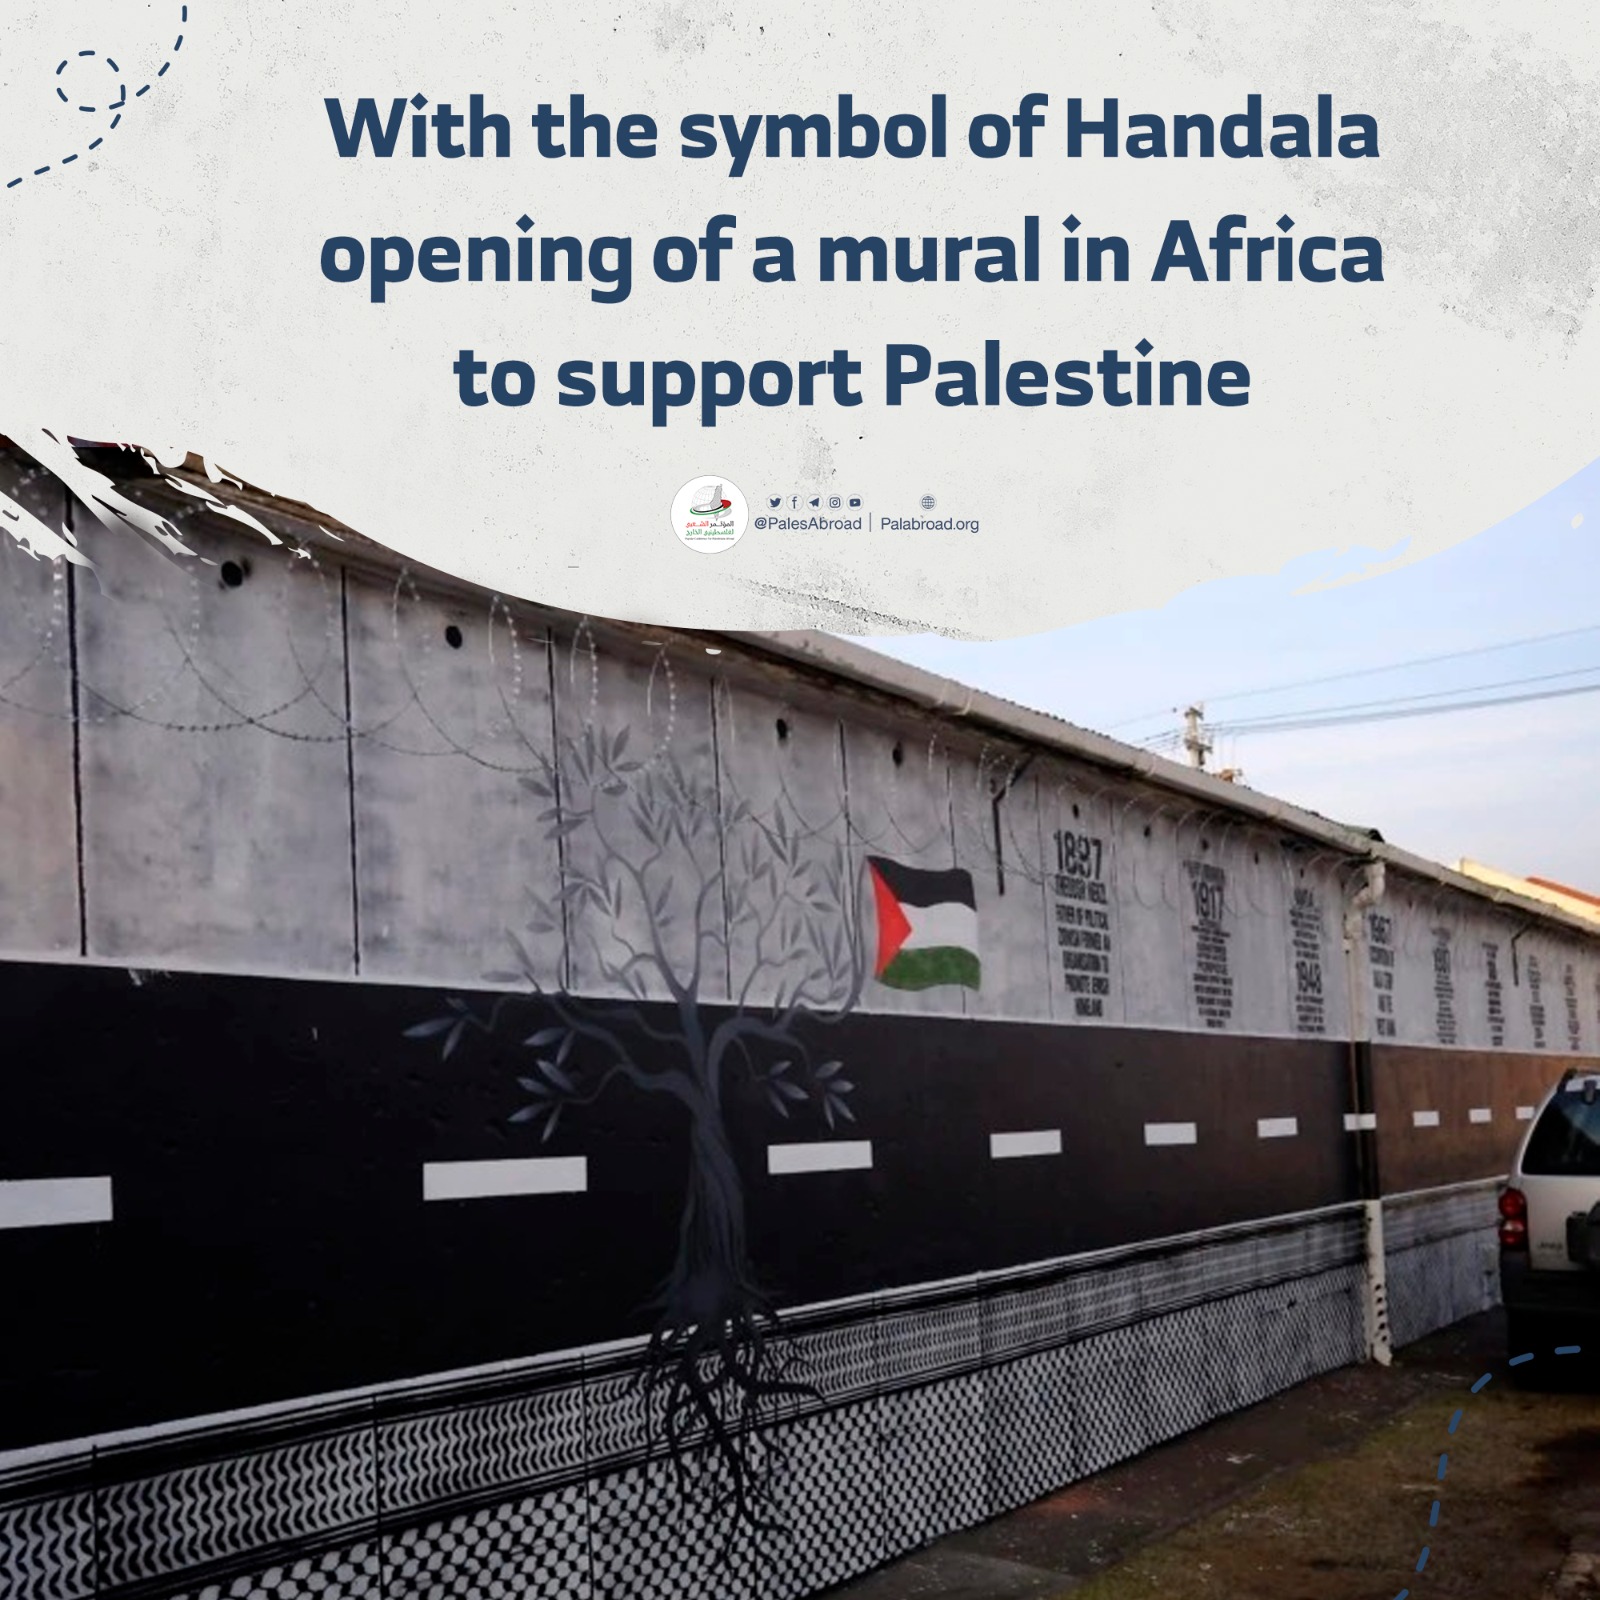 With the symbol of Handala.. Opening of a great mural in Africa to support Palestine